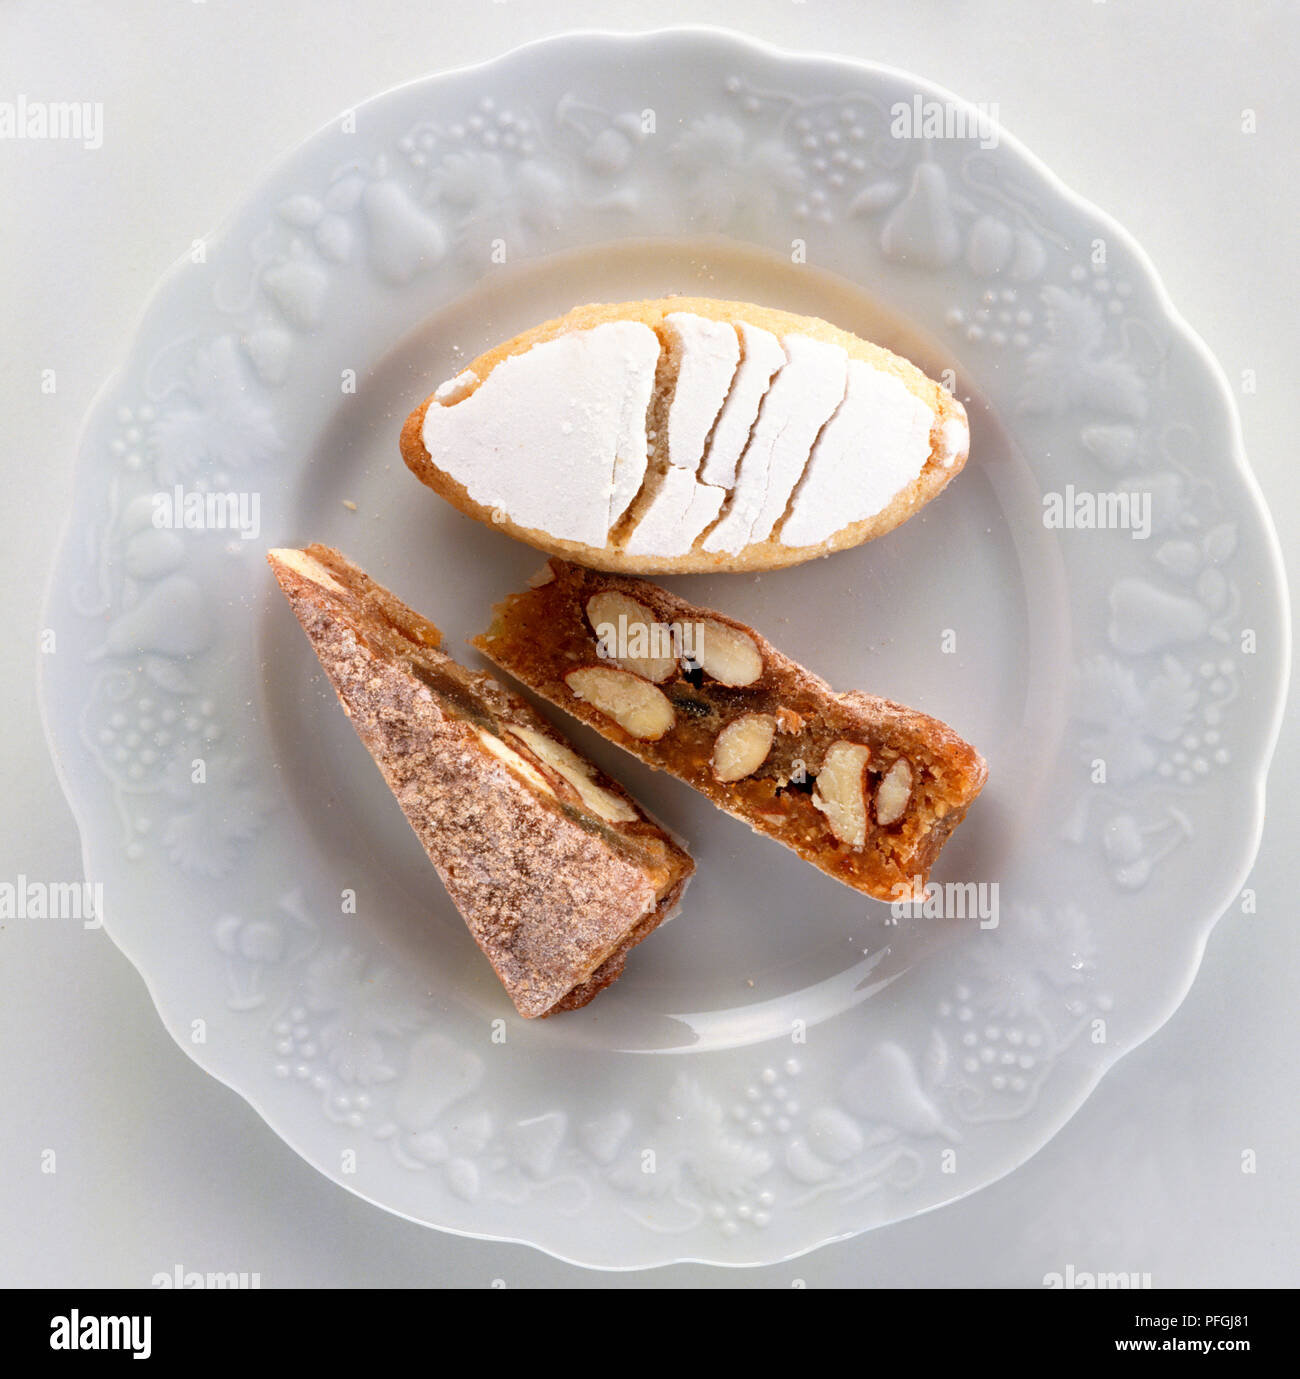 Slices of Panforte, dense dark cake spiced with cloves and cinnamon, and oval-shaped Ricciarelli made from almonds, orange and honey. Stock Photo